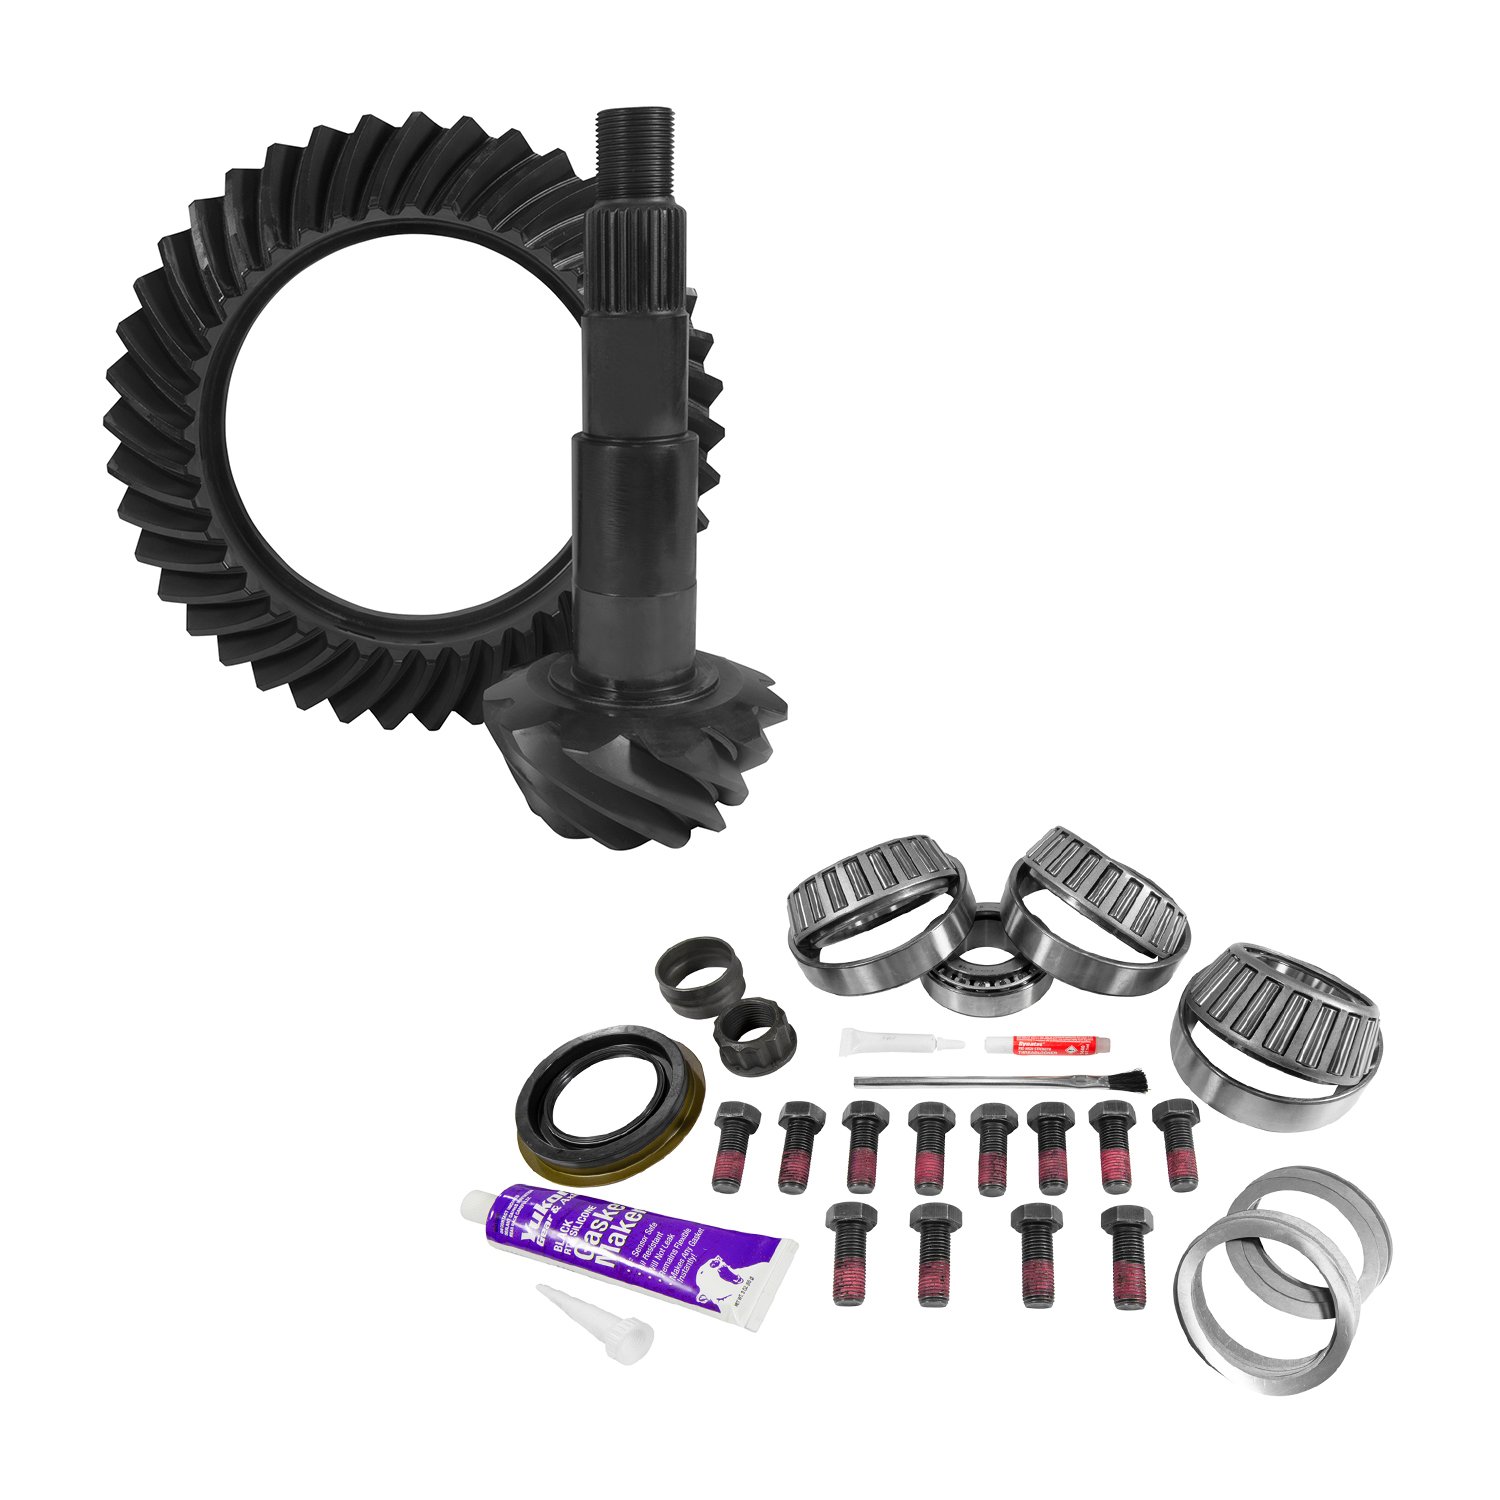 USA Standard 10825 11.5 in. Aam 3.73 Rear Ring & Pinion Install Kit, 4.375 in. Od Pinion Bearing